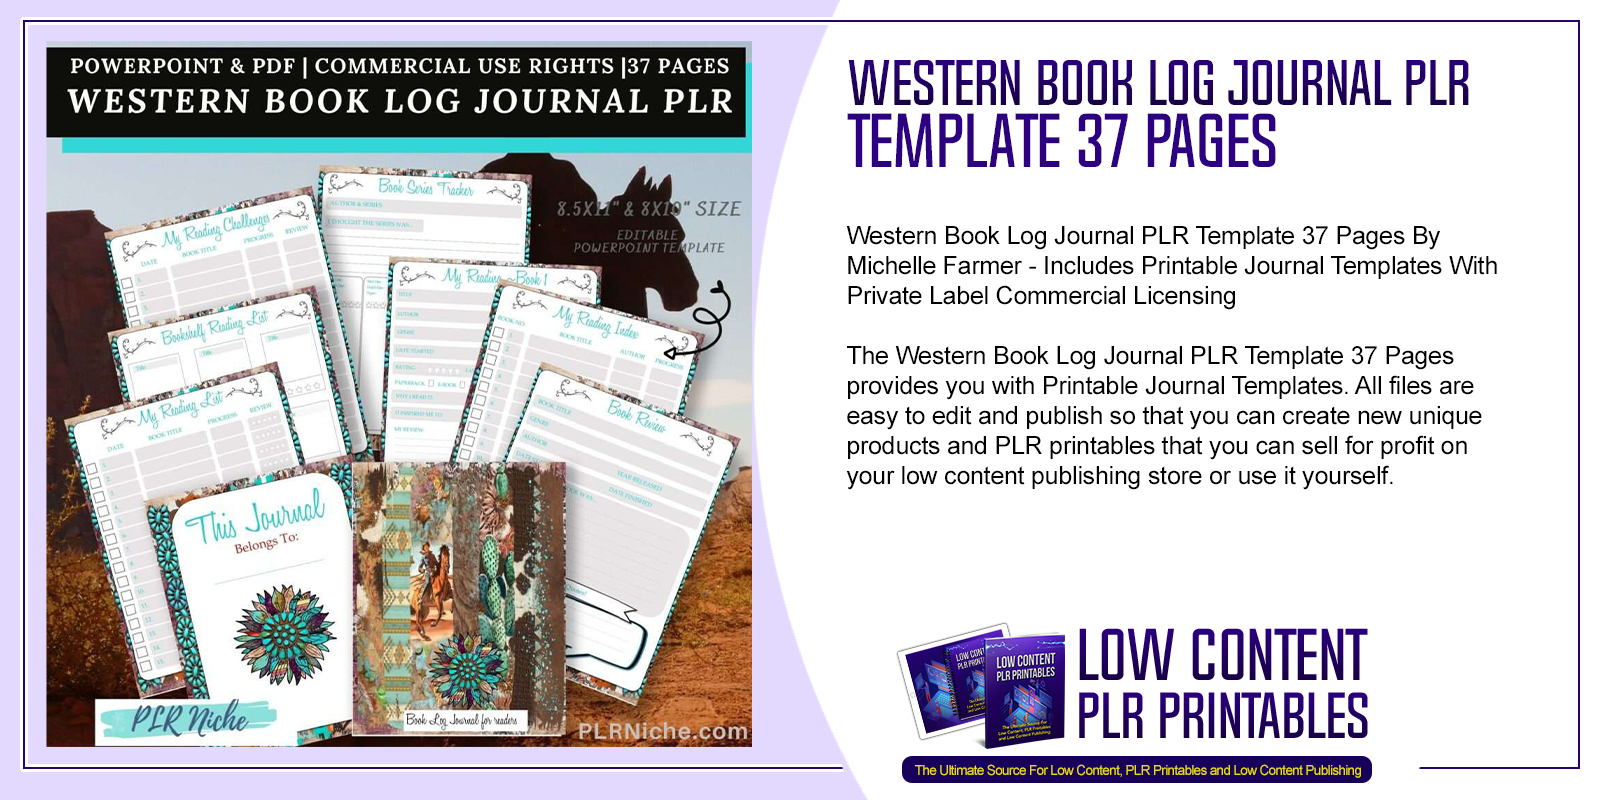 Western Book Log Journal PLR Template 37 Pages